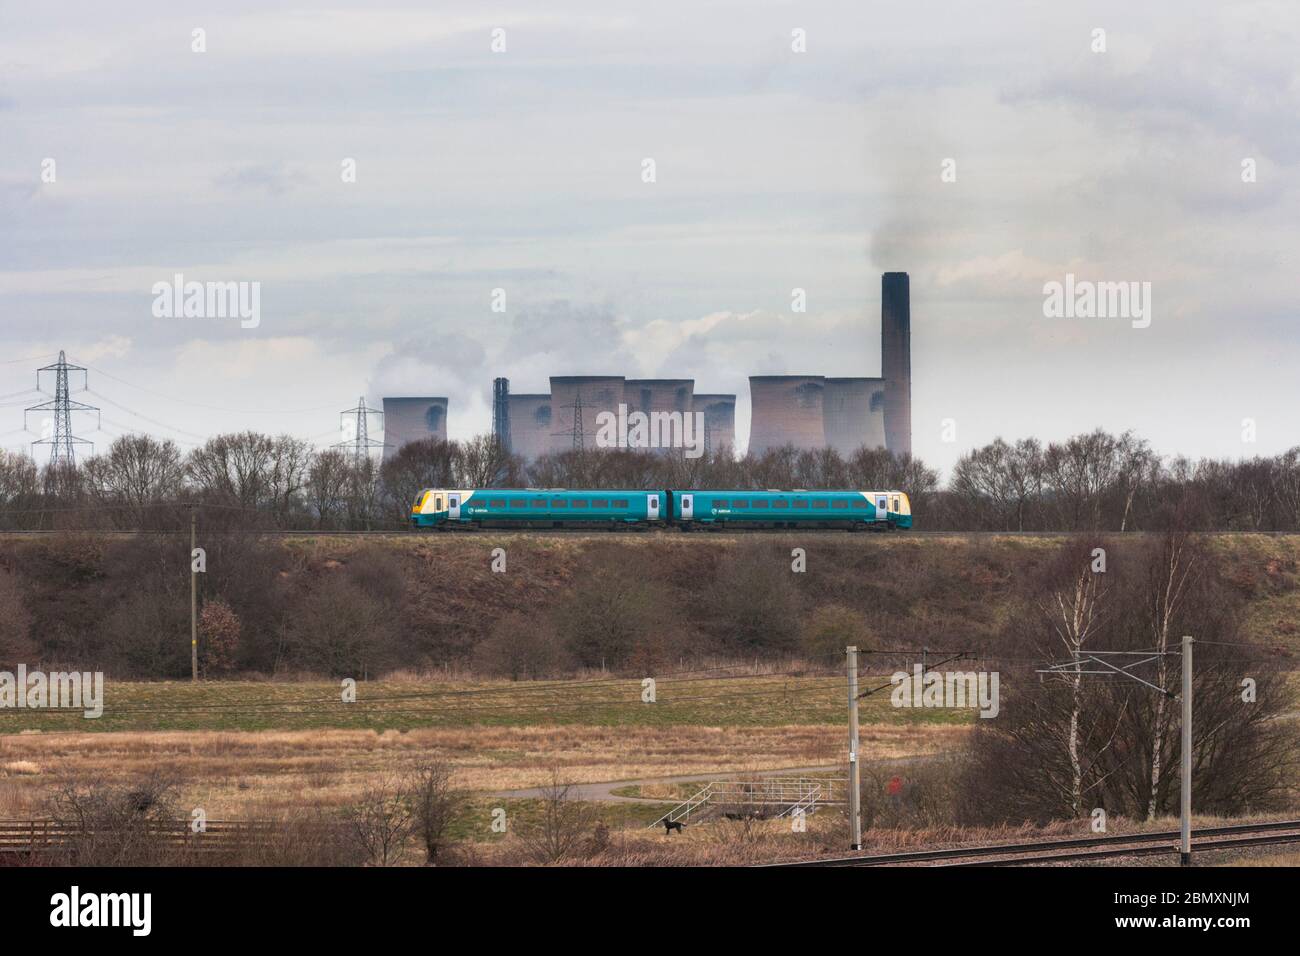 Arriva trains Wales class 175 Alstom Coradia train passing Daresbury, south of Warrington with Fiddlers Ferry power station cooling towers  behind Stock Photo